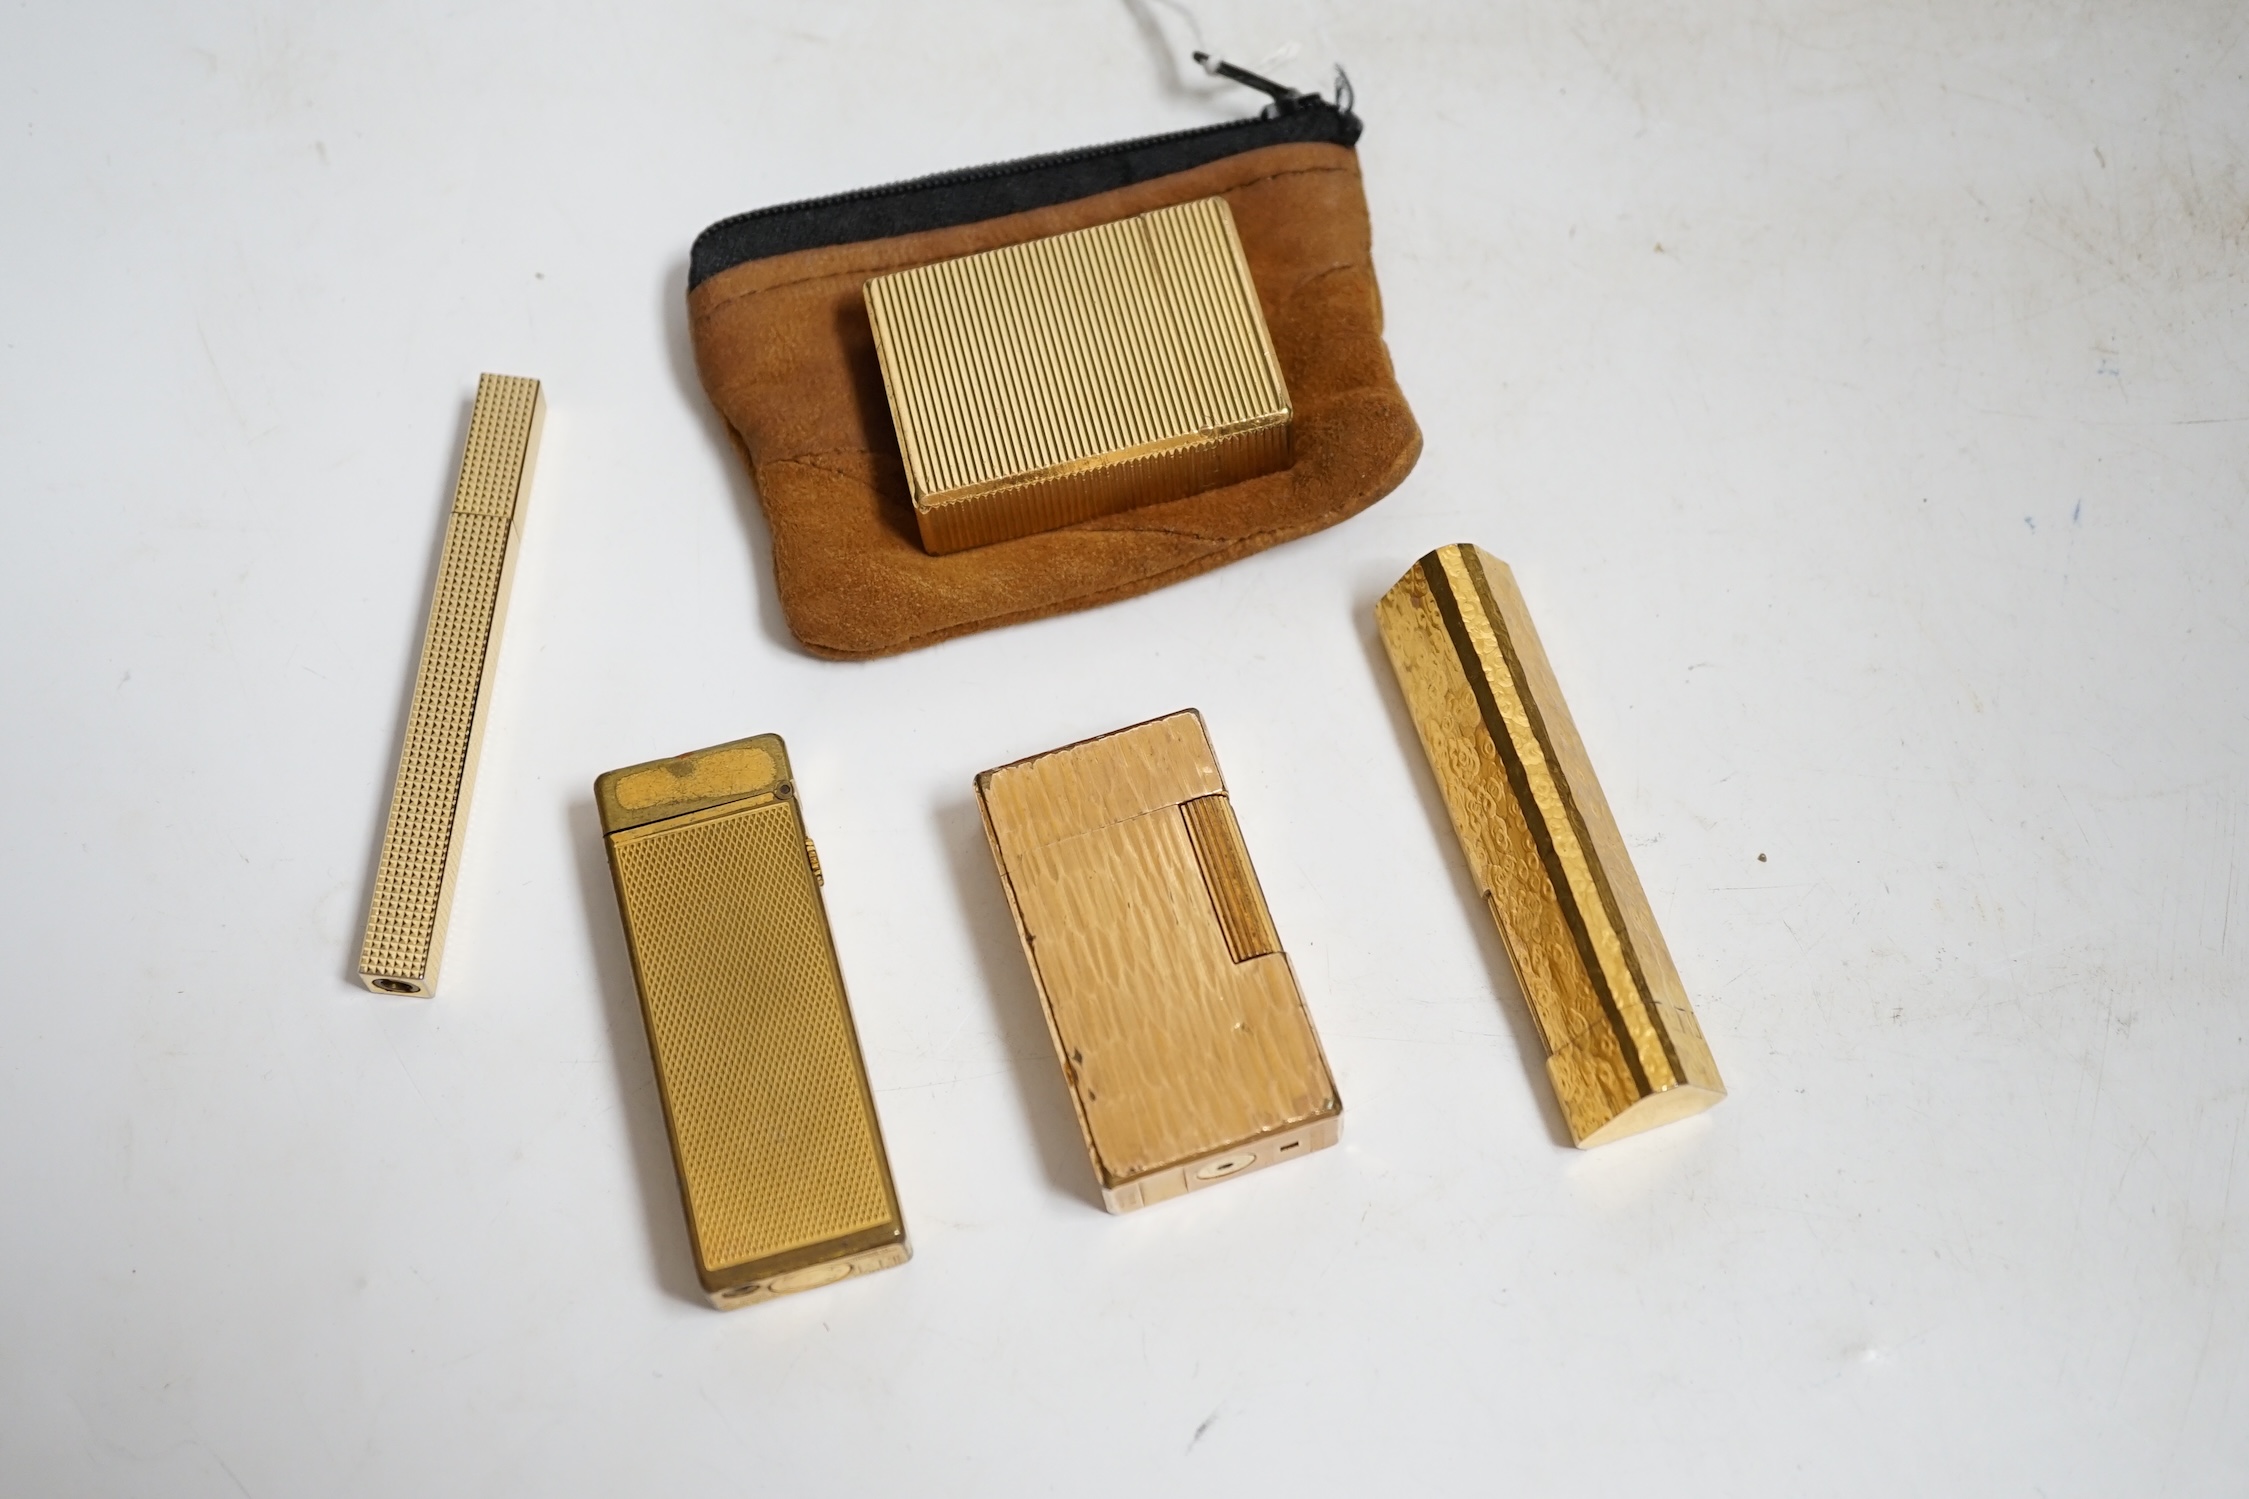 Two Dunhill gold plated lighters, a Dupont lighter and two others. Condition - fair, not working